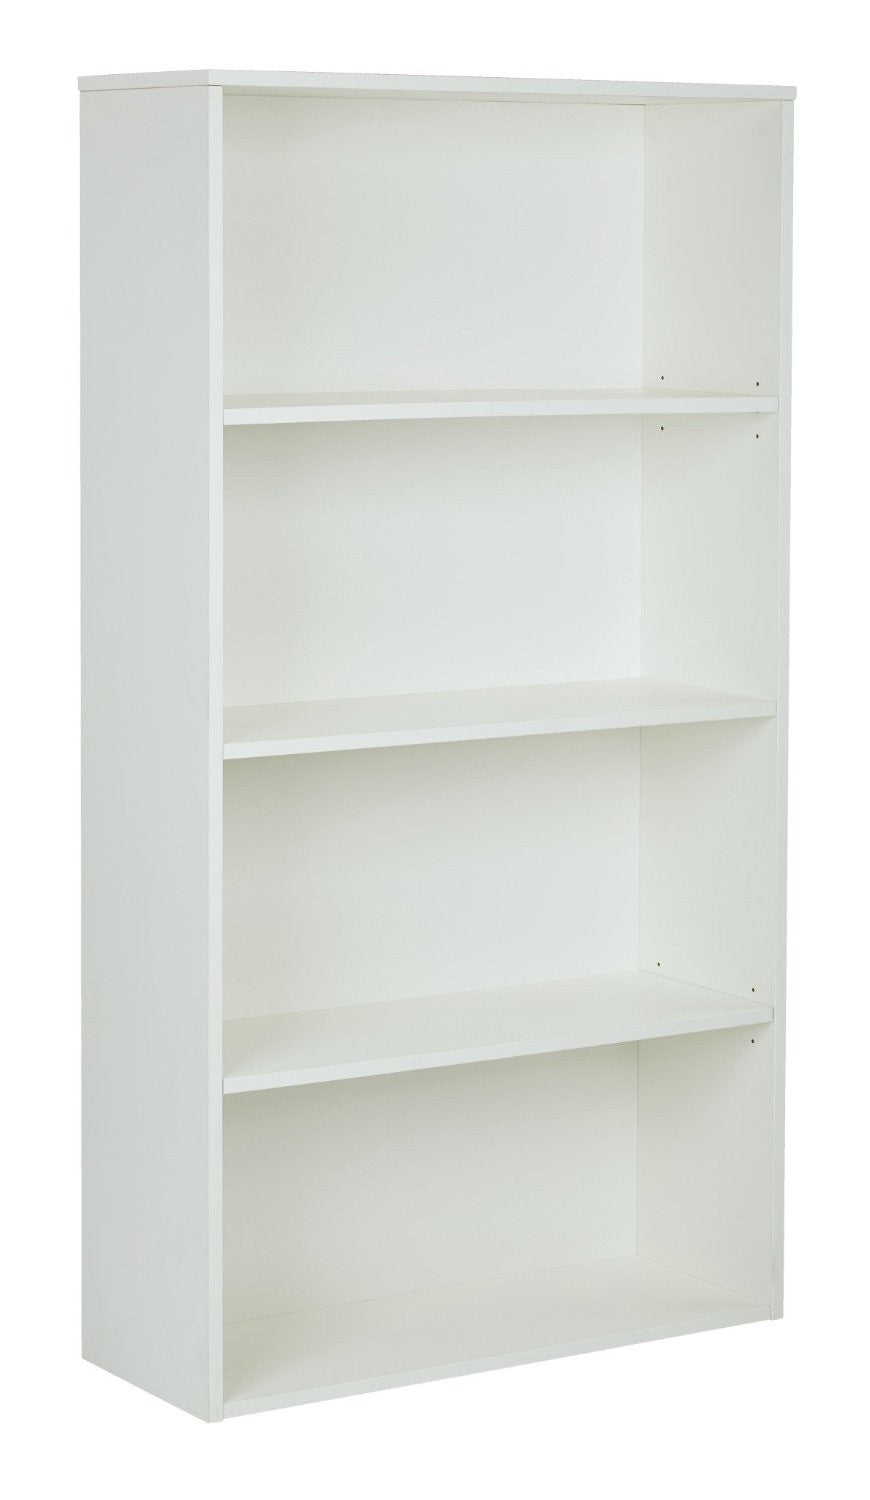 Pro-line Ii Prd3260-wh Prado 60" 4-shelf Bookcase With 3/4" Shelves And 2 Adjustable/ 2 Fixed Shelves In White